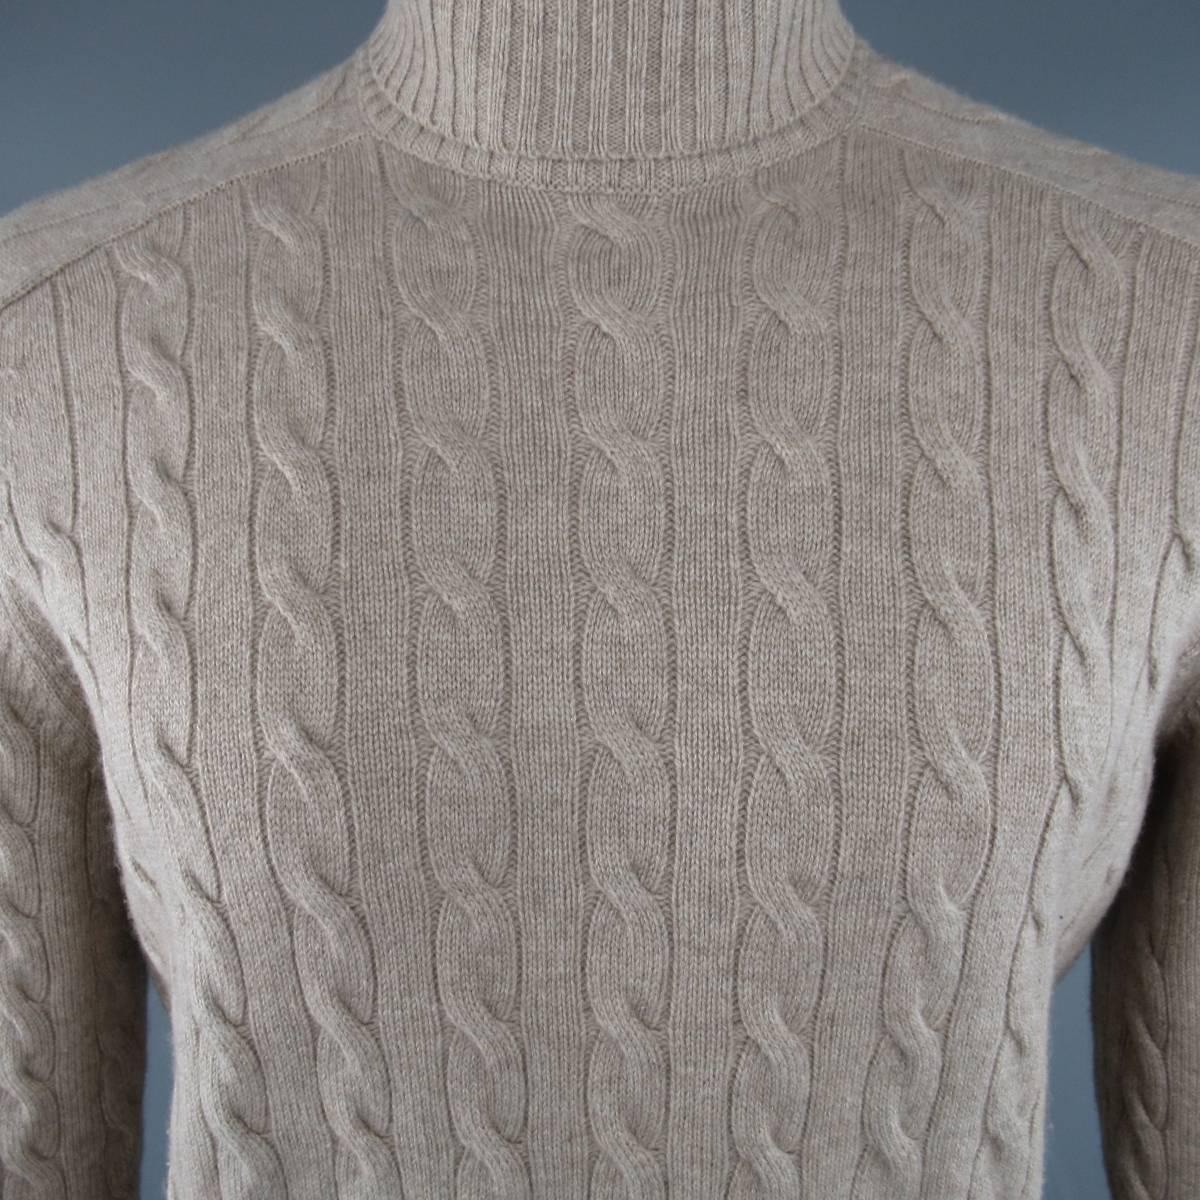 BRUNELLO CUCINELLI Turtleneck Sweater consists of cashmere blend material in a oatmeal color tone. Designed with a rib high collar, raglan shoulders and cable knit pattern throughout body. Rib cuff and hem. Made in Italy.
 
Good Pre-Owned